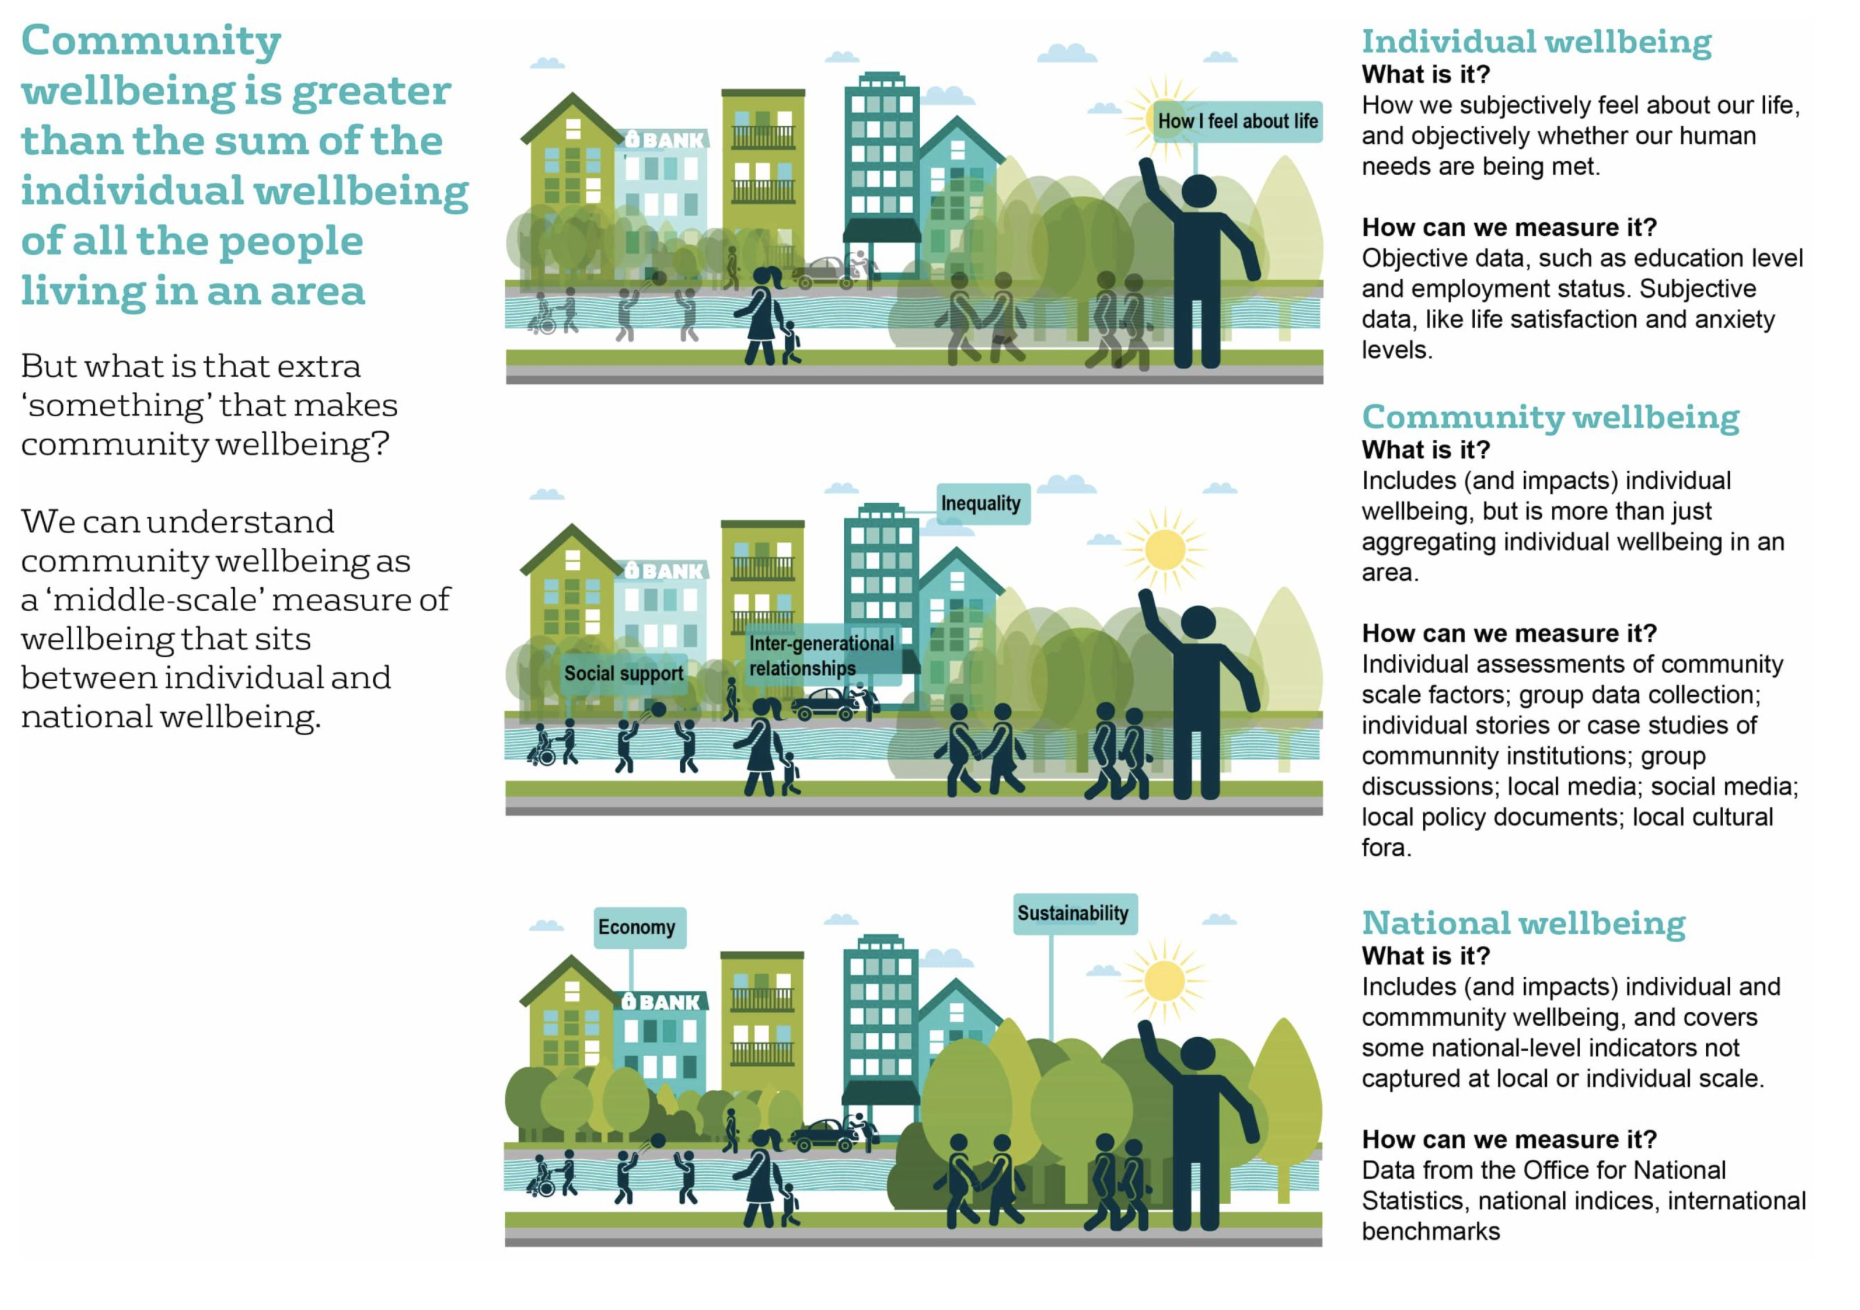 Excerpt from community wellbeing conceptual report